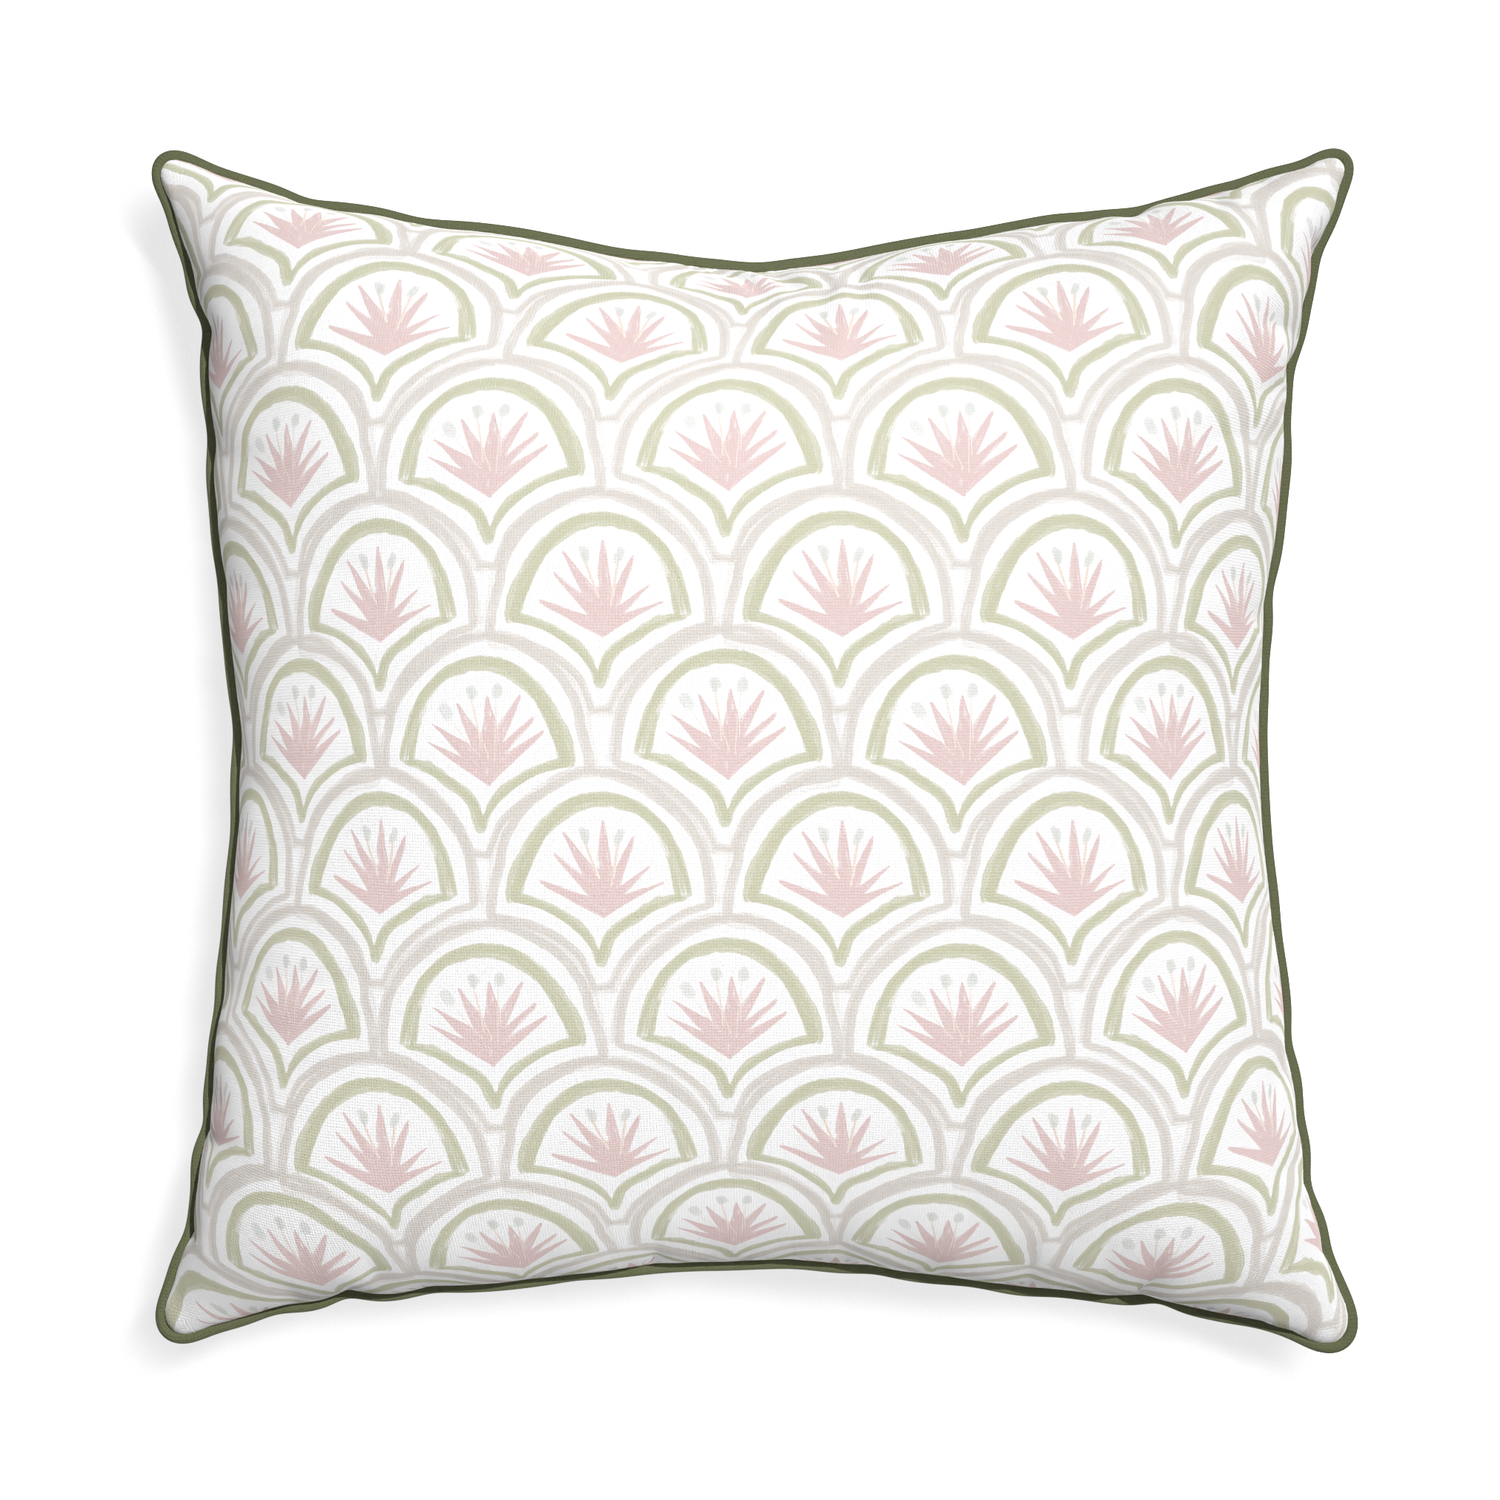 Euro-sham thatcher rose custom pillow with f piping on white background